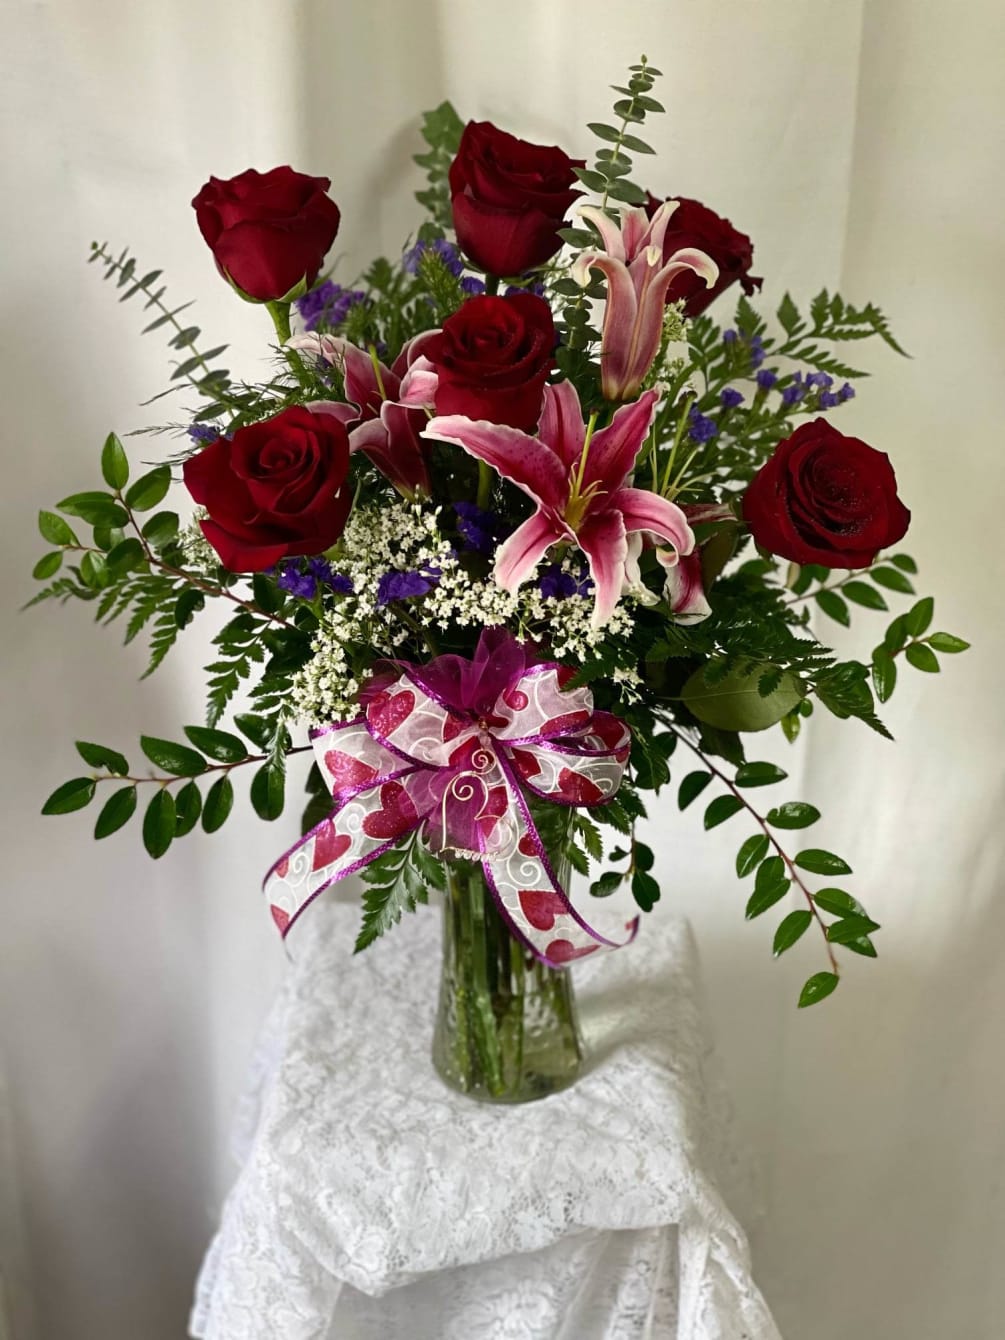 Pink lilies and red roses